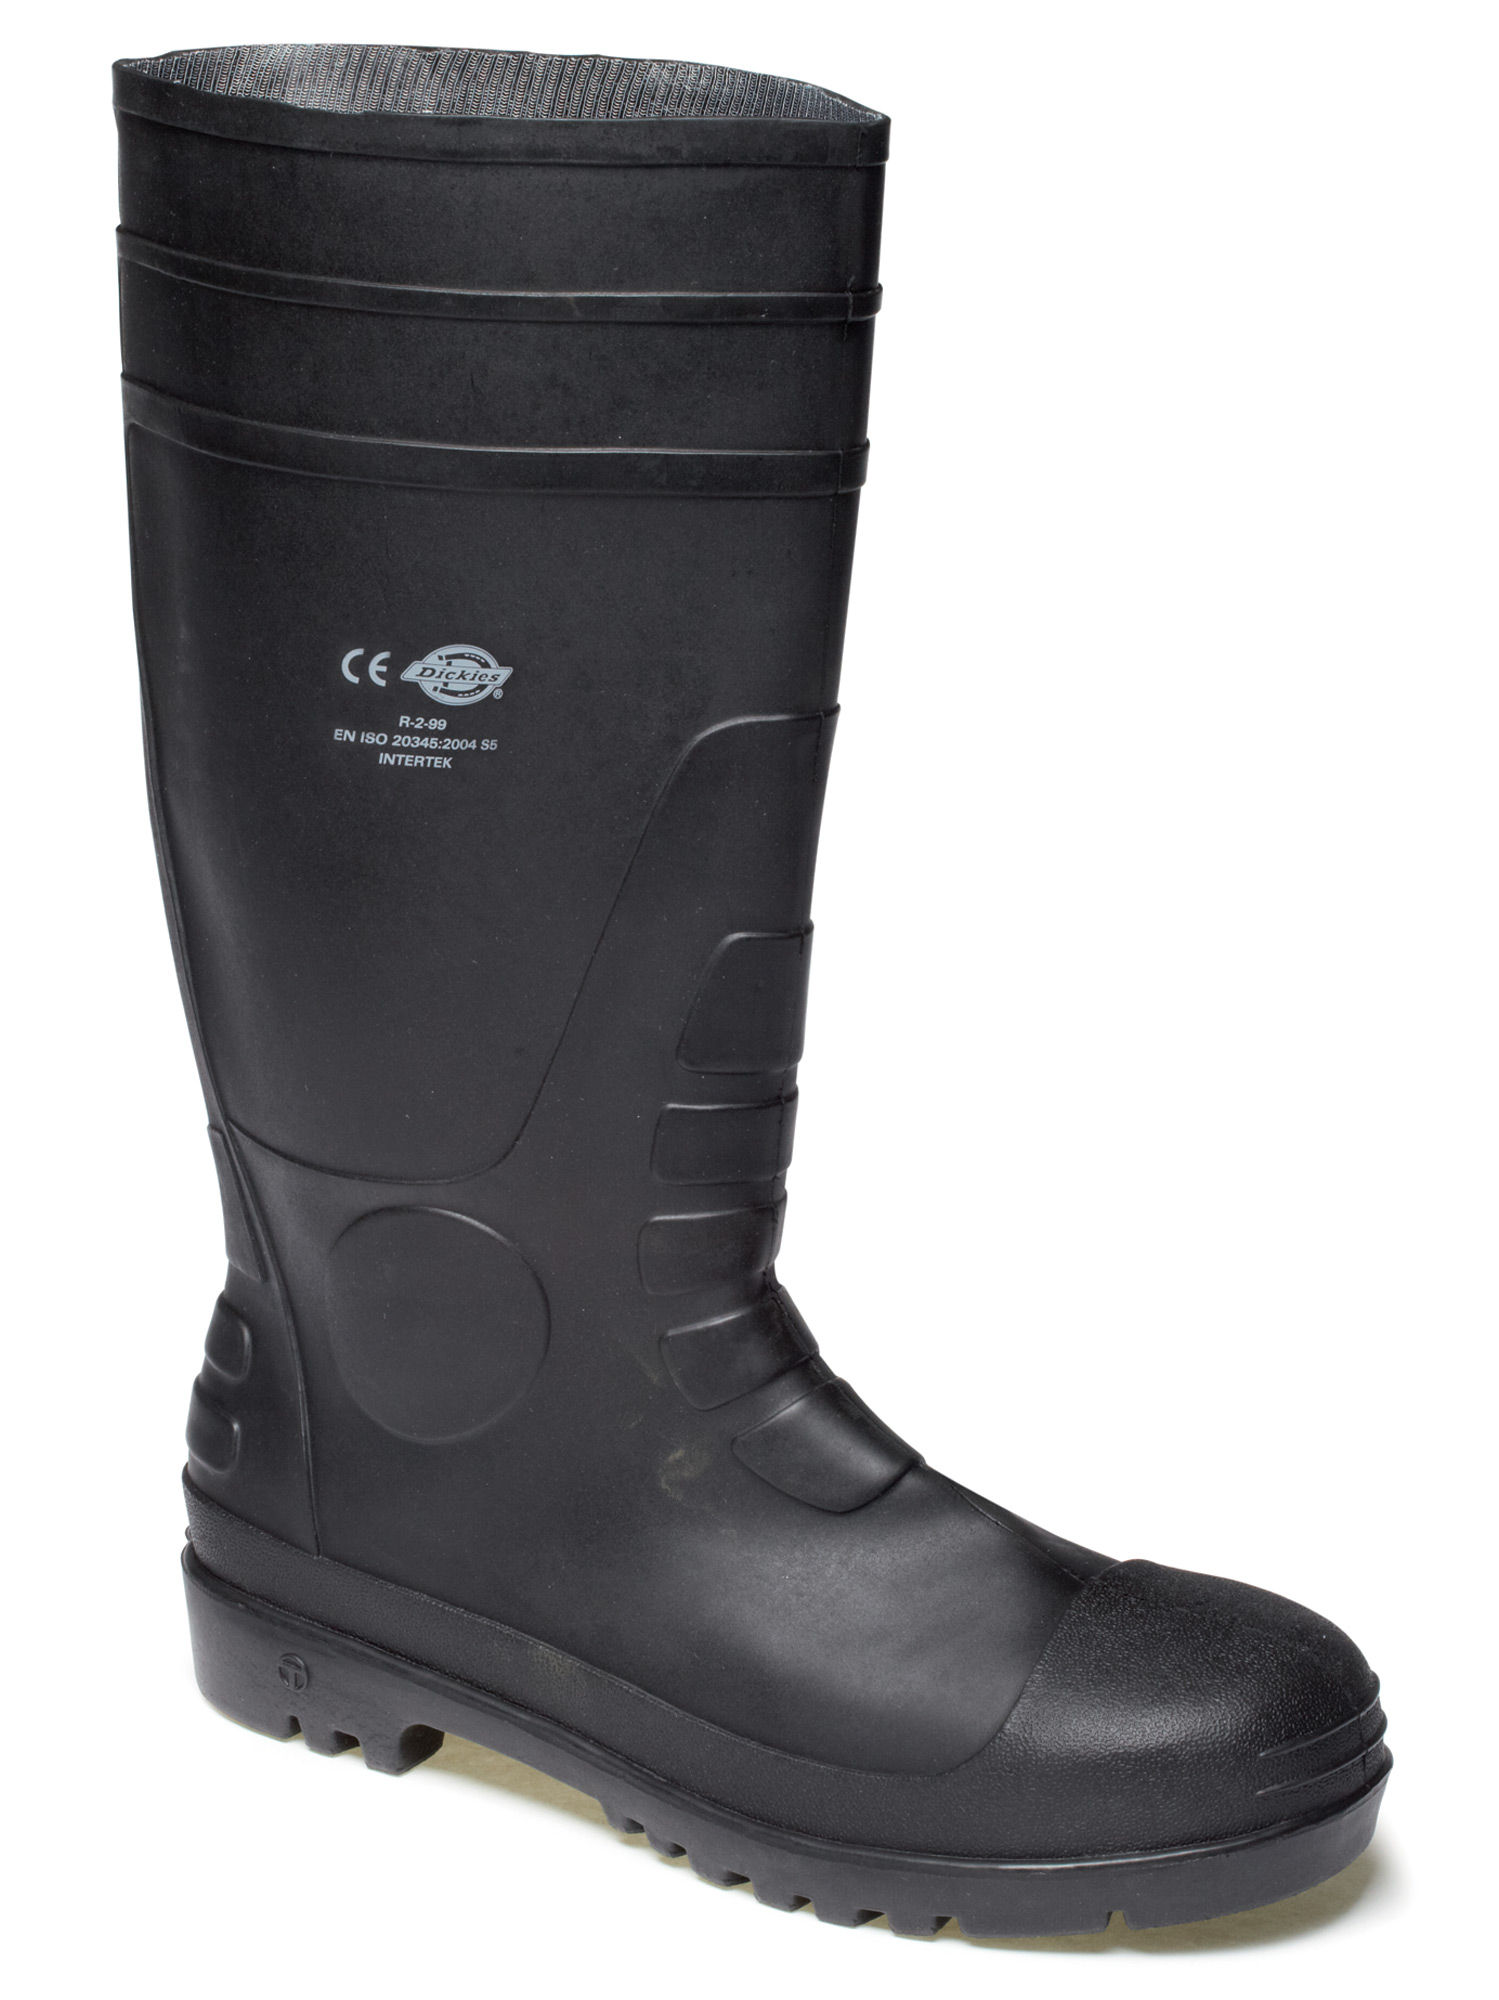 Dickies Super Safety Wellington Boots (Black) FW13105